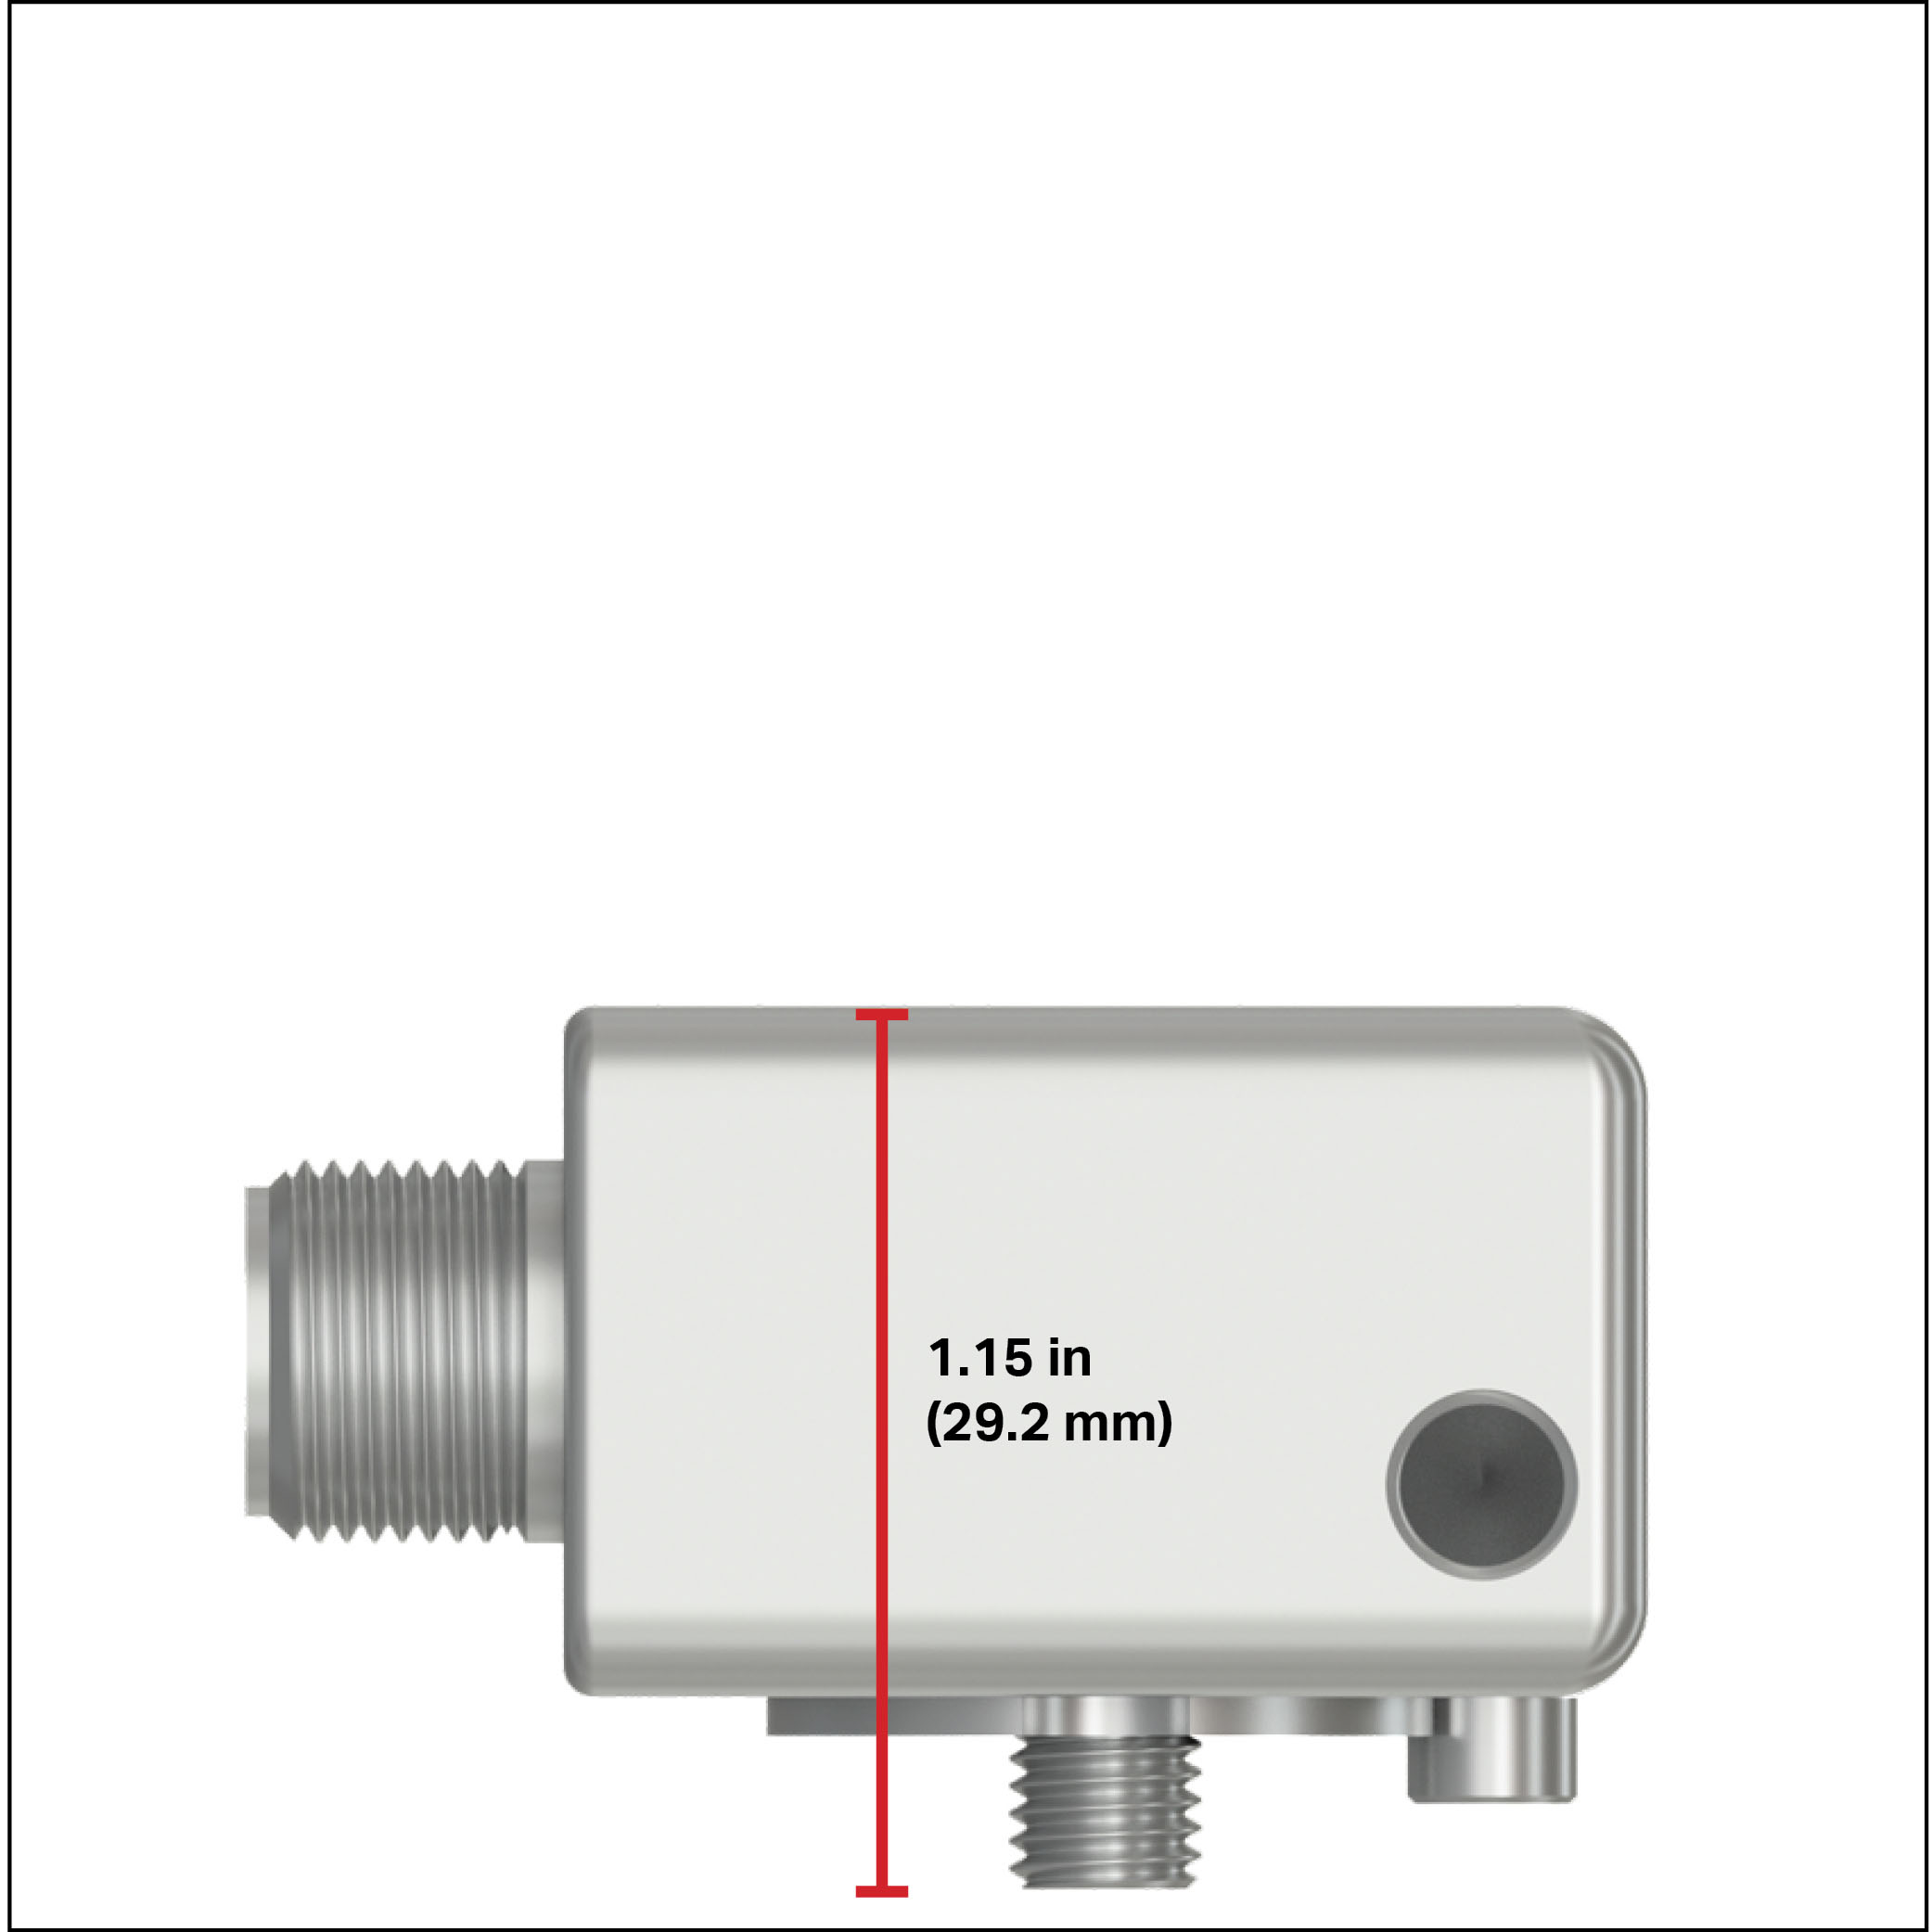 TREA331 Legacy triaxial accelerometer with a height dimension of 1.15 inches shown.